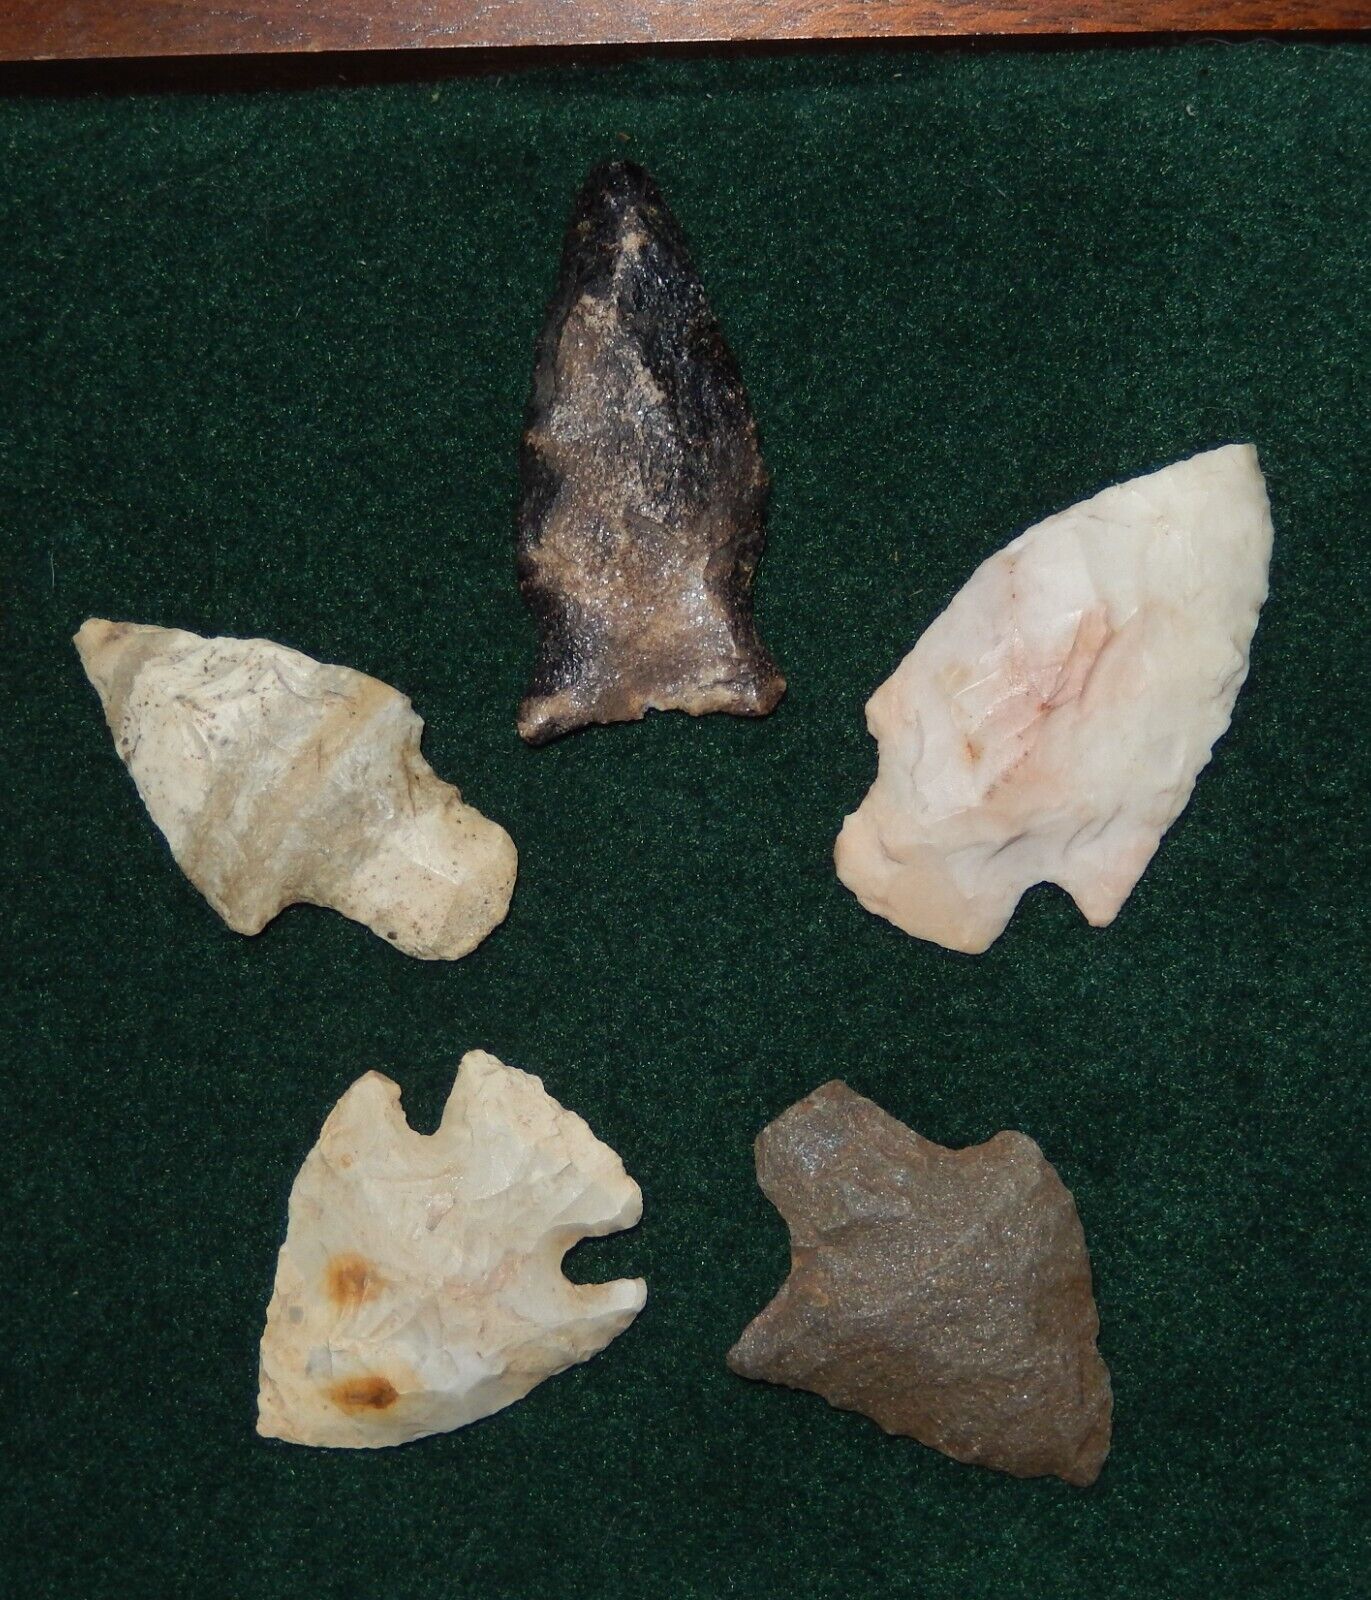 ***FIVE NICE AUTHENTIC POINTS FOUND IN ARKANSAS A6